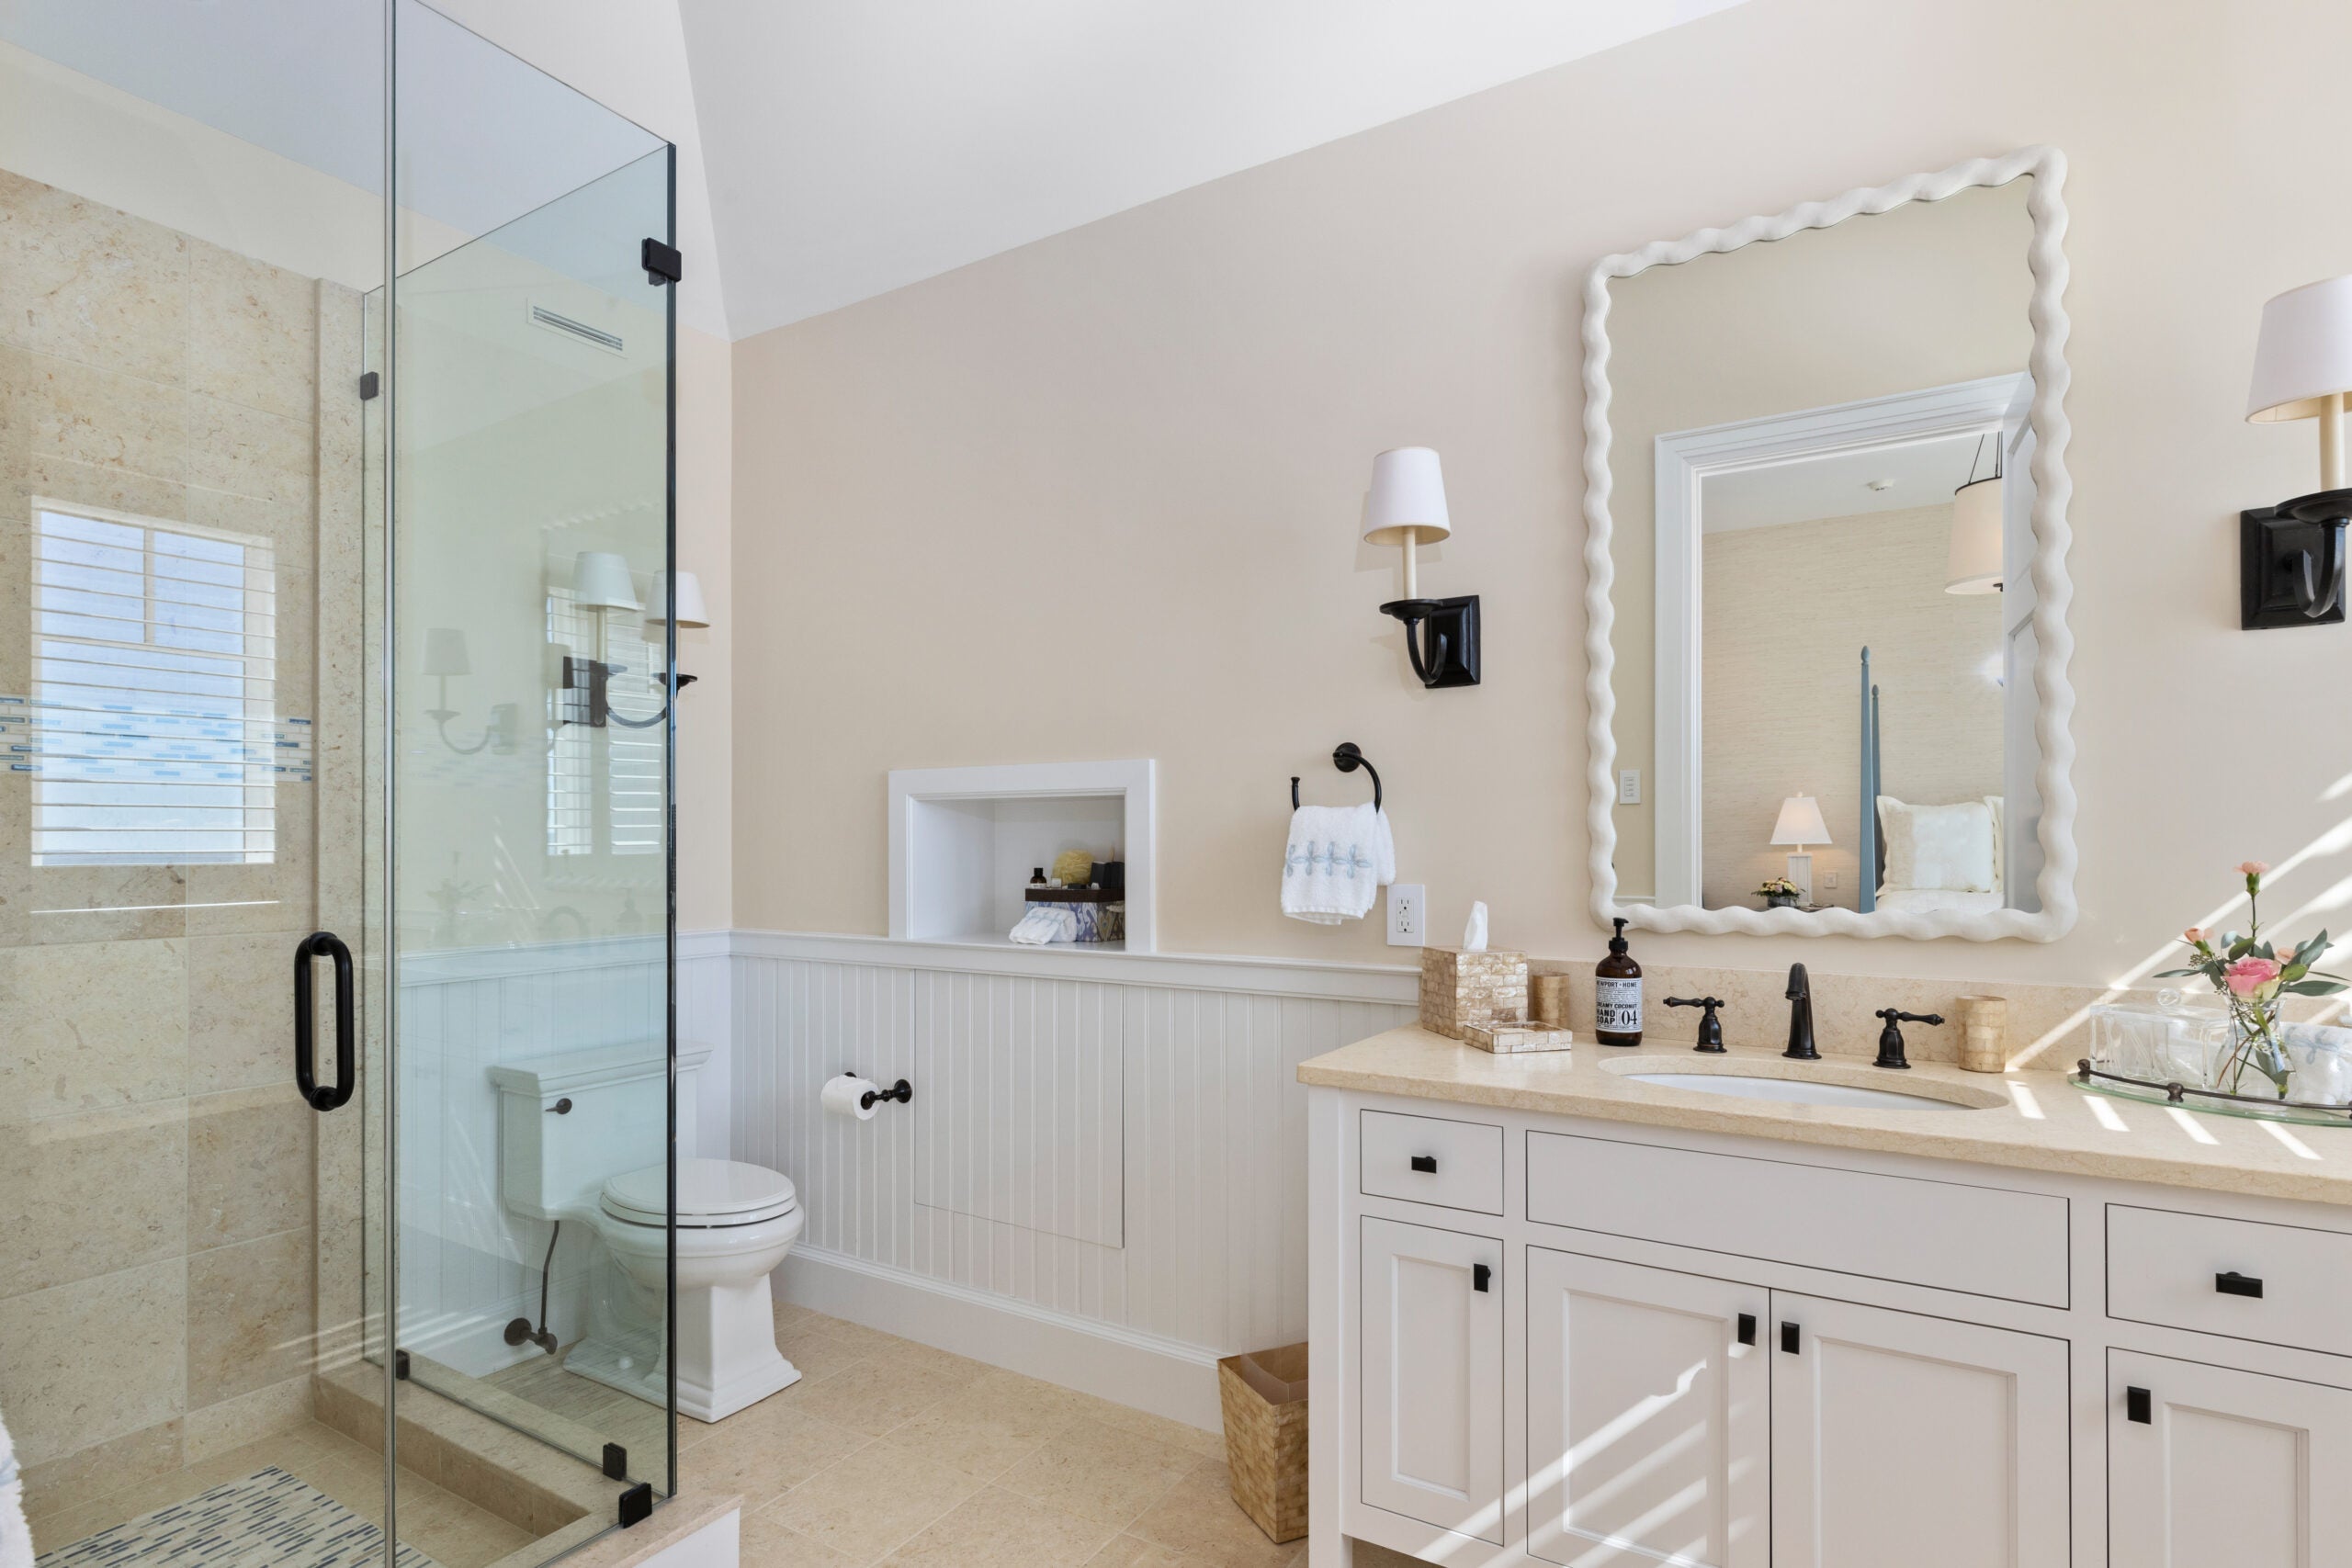 A bathroom with a single vanity, bead-board wainscoting, an inset shelf, a rectangular mirror with a white frame that mimics a frosted cake edge, white cabinetry, a single vanity with a sandy-colored top, and a frameless glass shower.